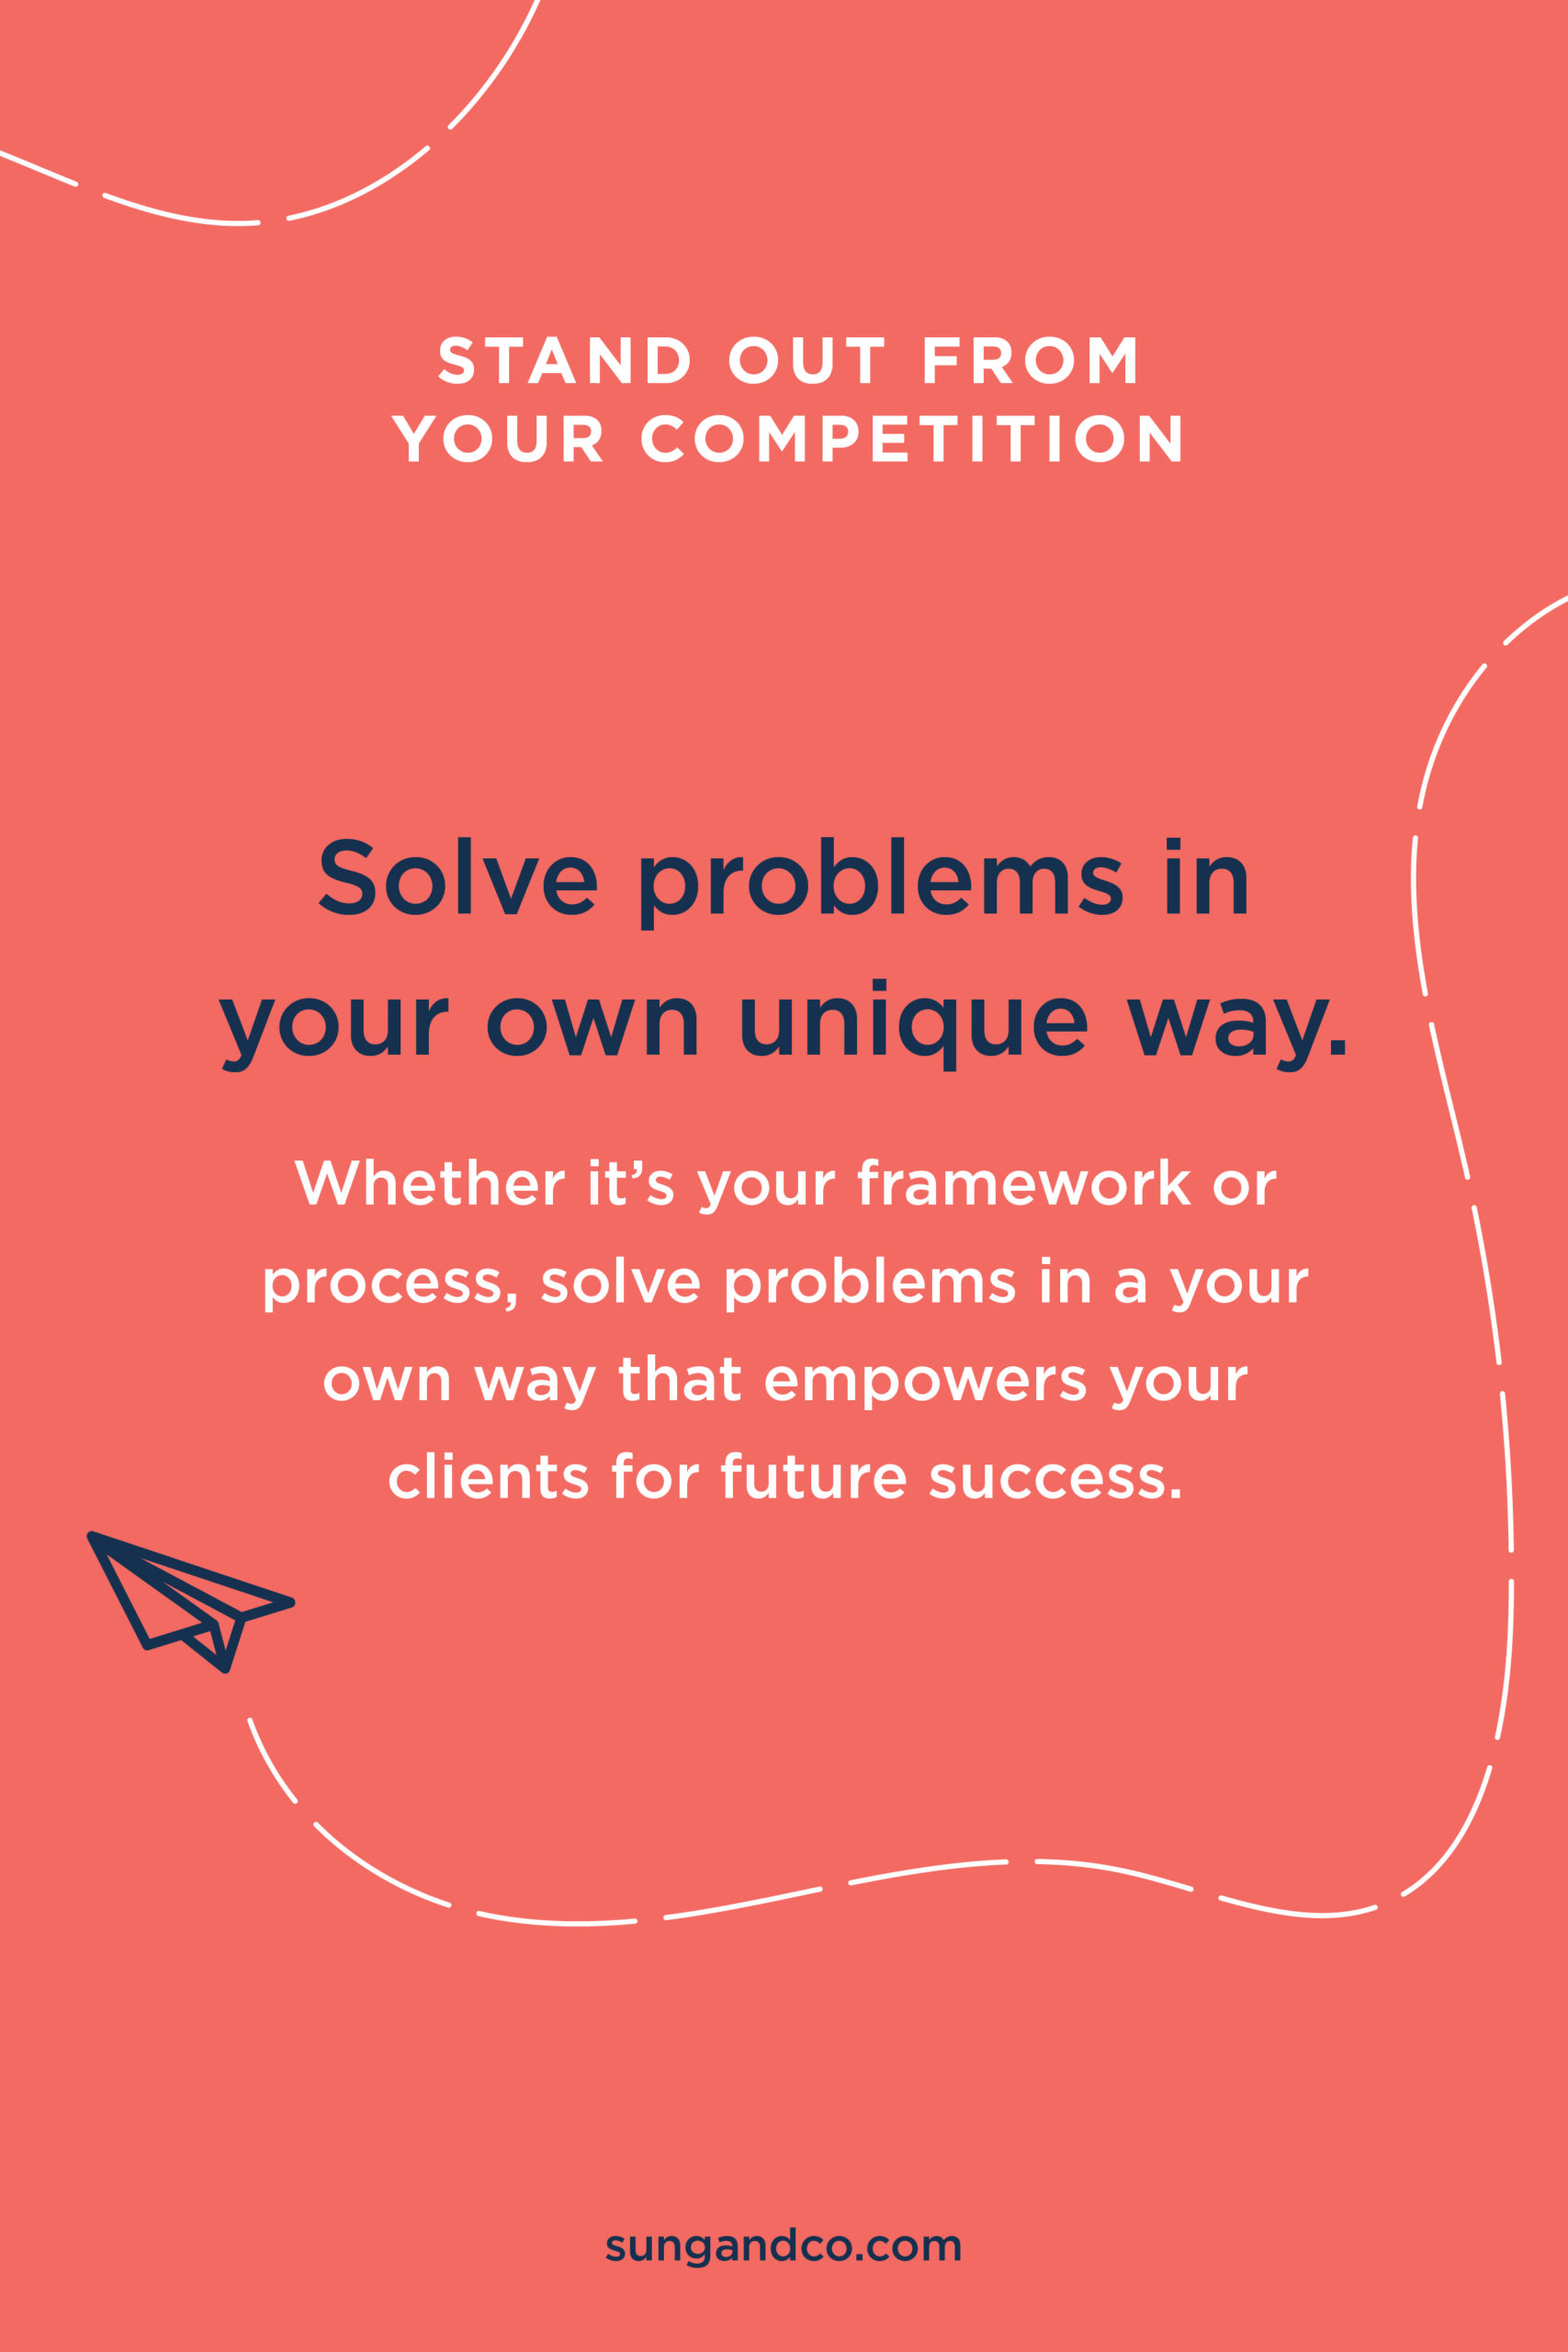 Stand out from your competitors by solving problems in your own unique way.